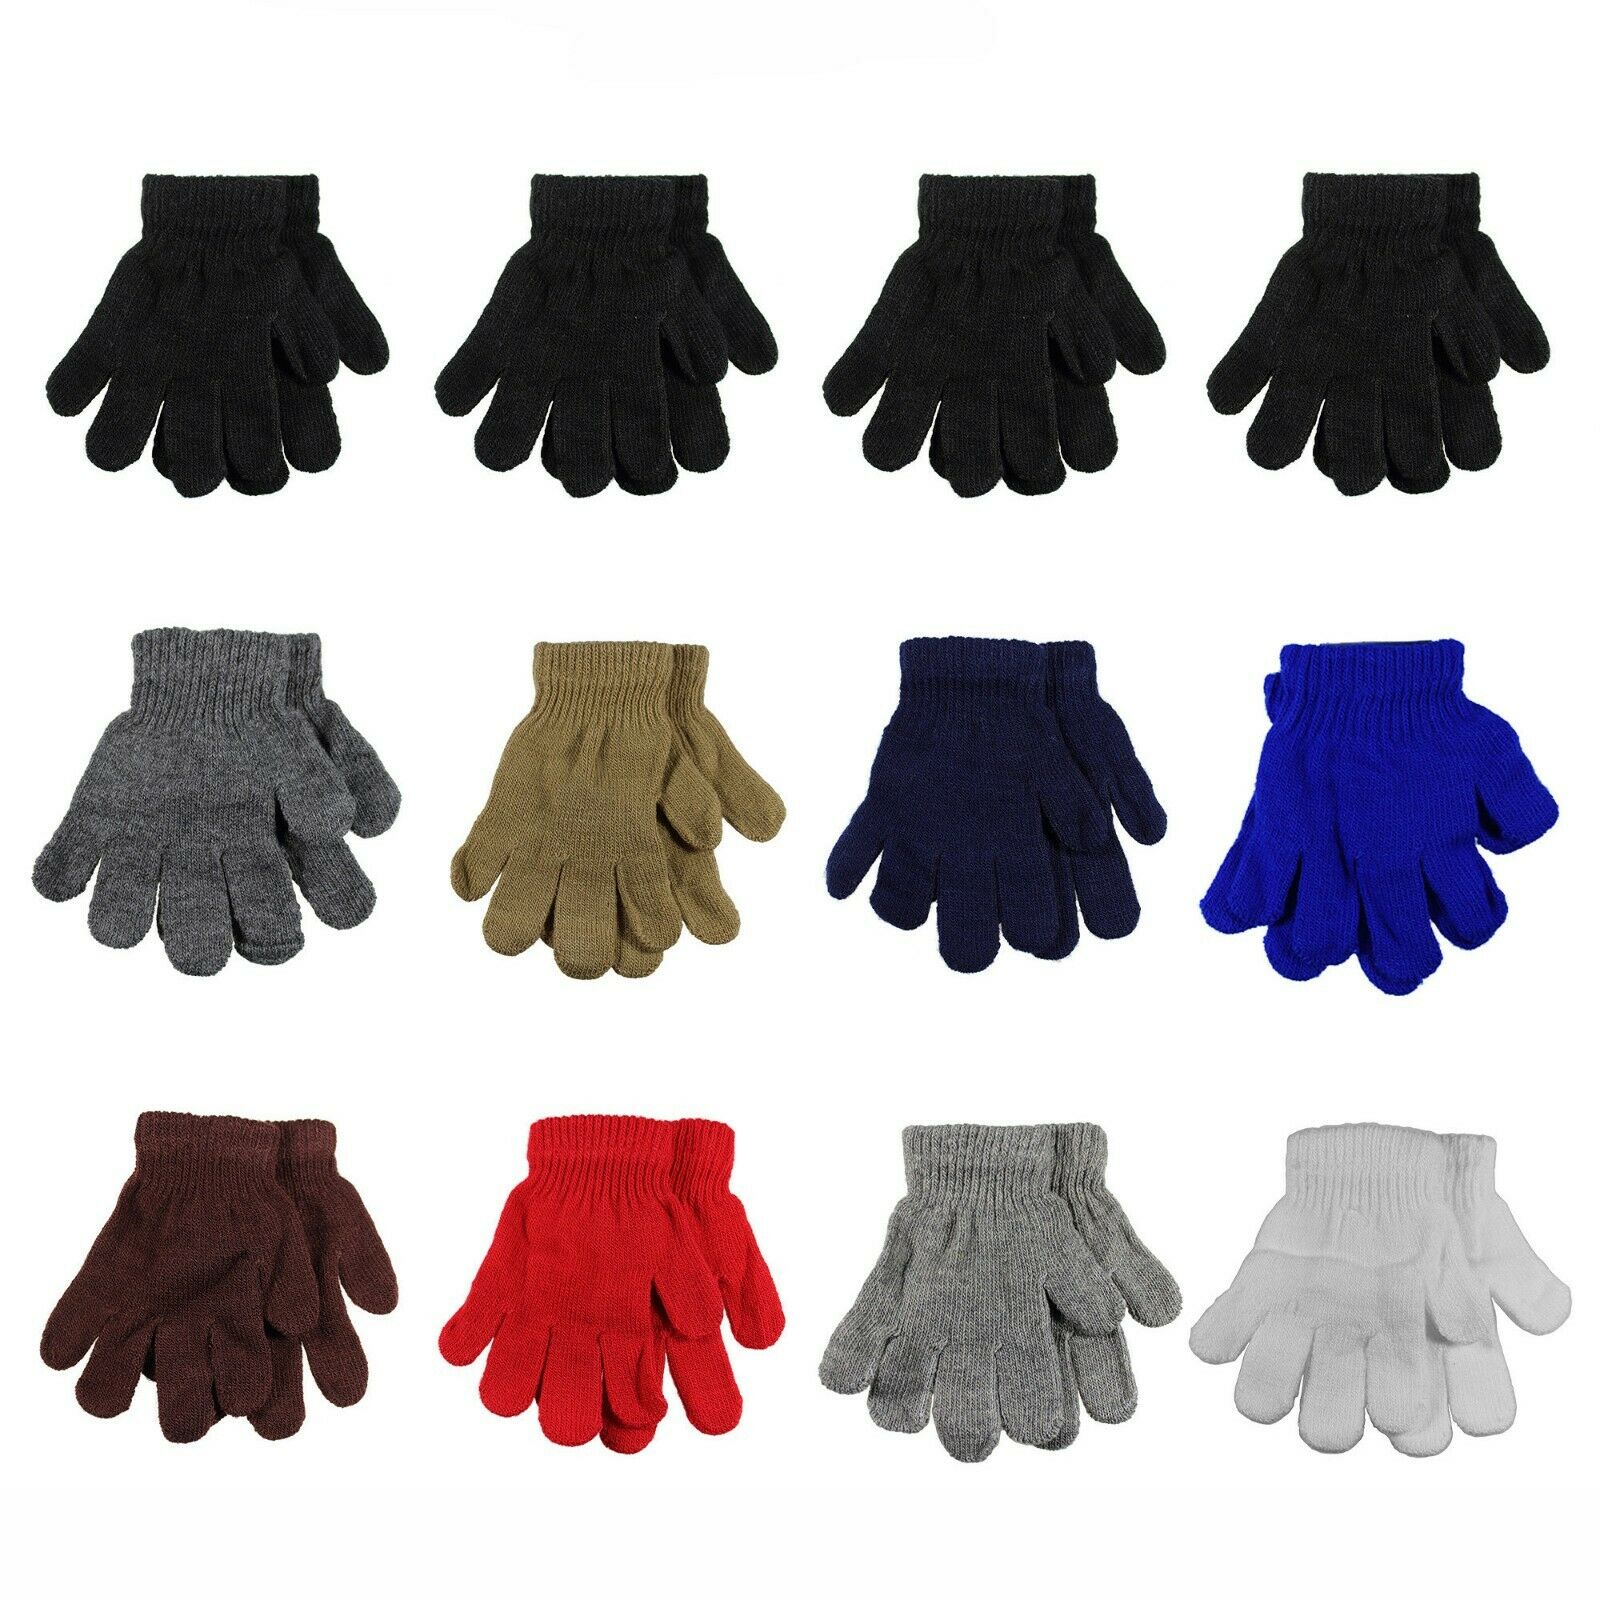 Kids Winter Knitted Magic Gloves Wholesale Lot 6 Or 12 Pairs